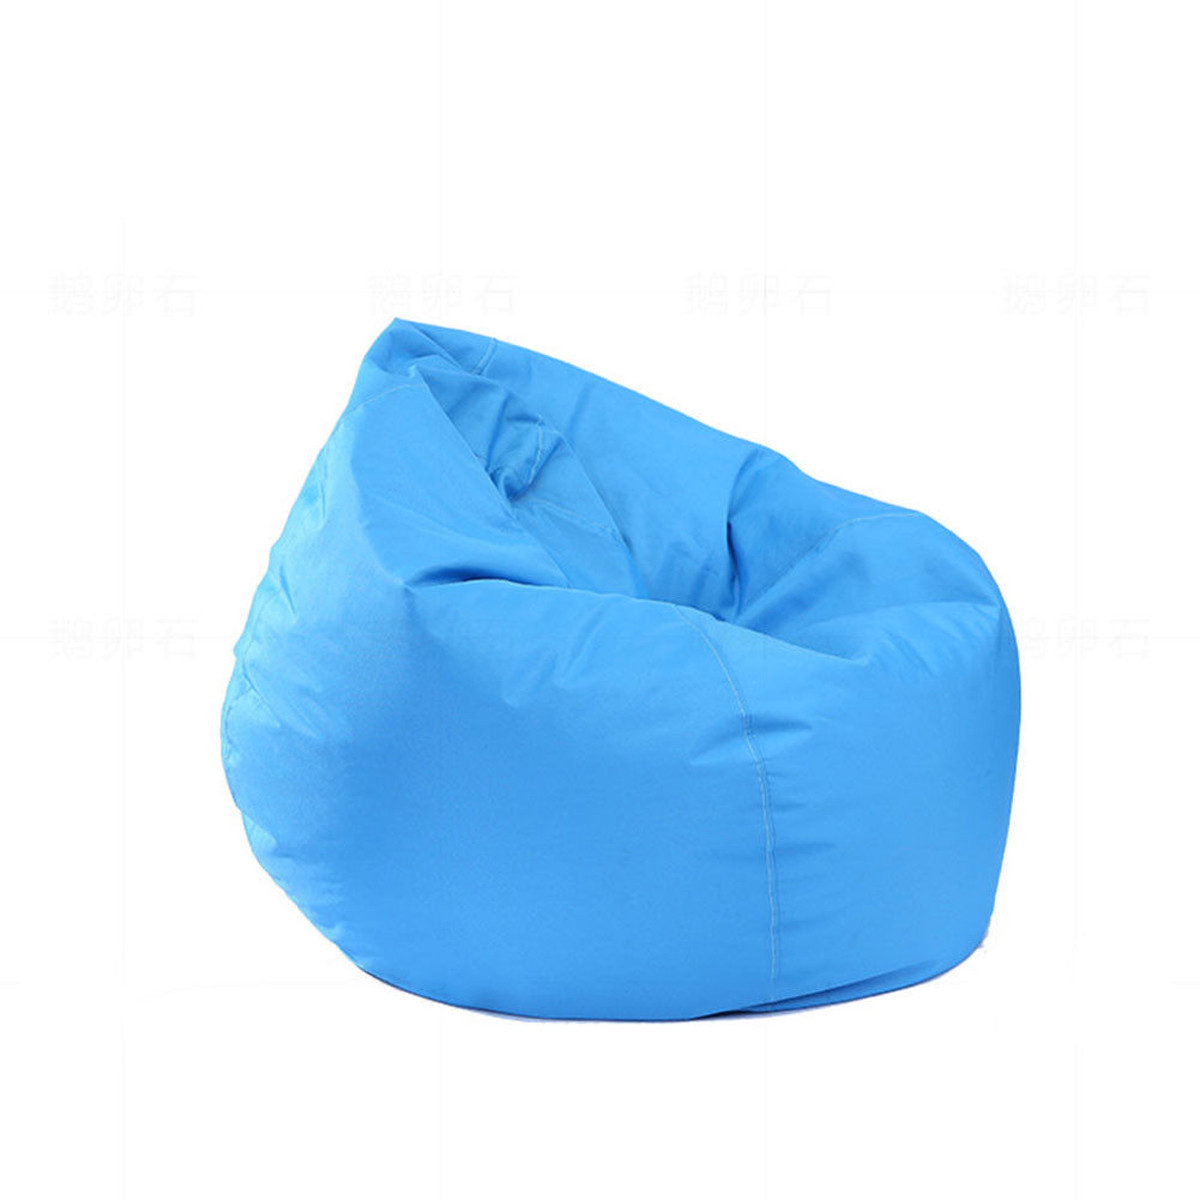 Blue Large Bean Bag Chair Adult Toy Storage Soy Bag Bean Bag Chair Cover Without Filling Sofa Cover Stuffed Animal Storage Bean Bag Chair Cover